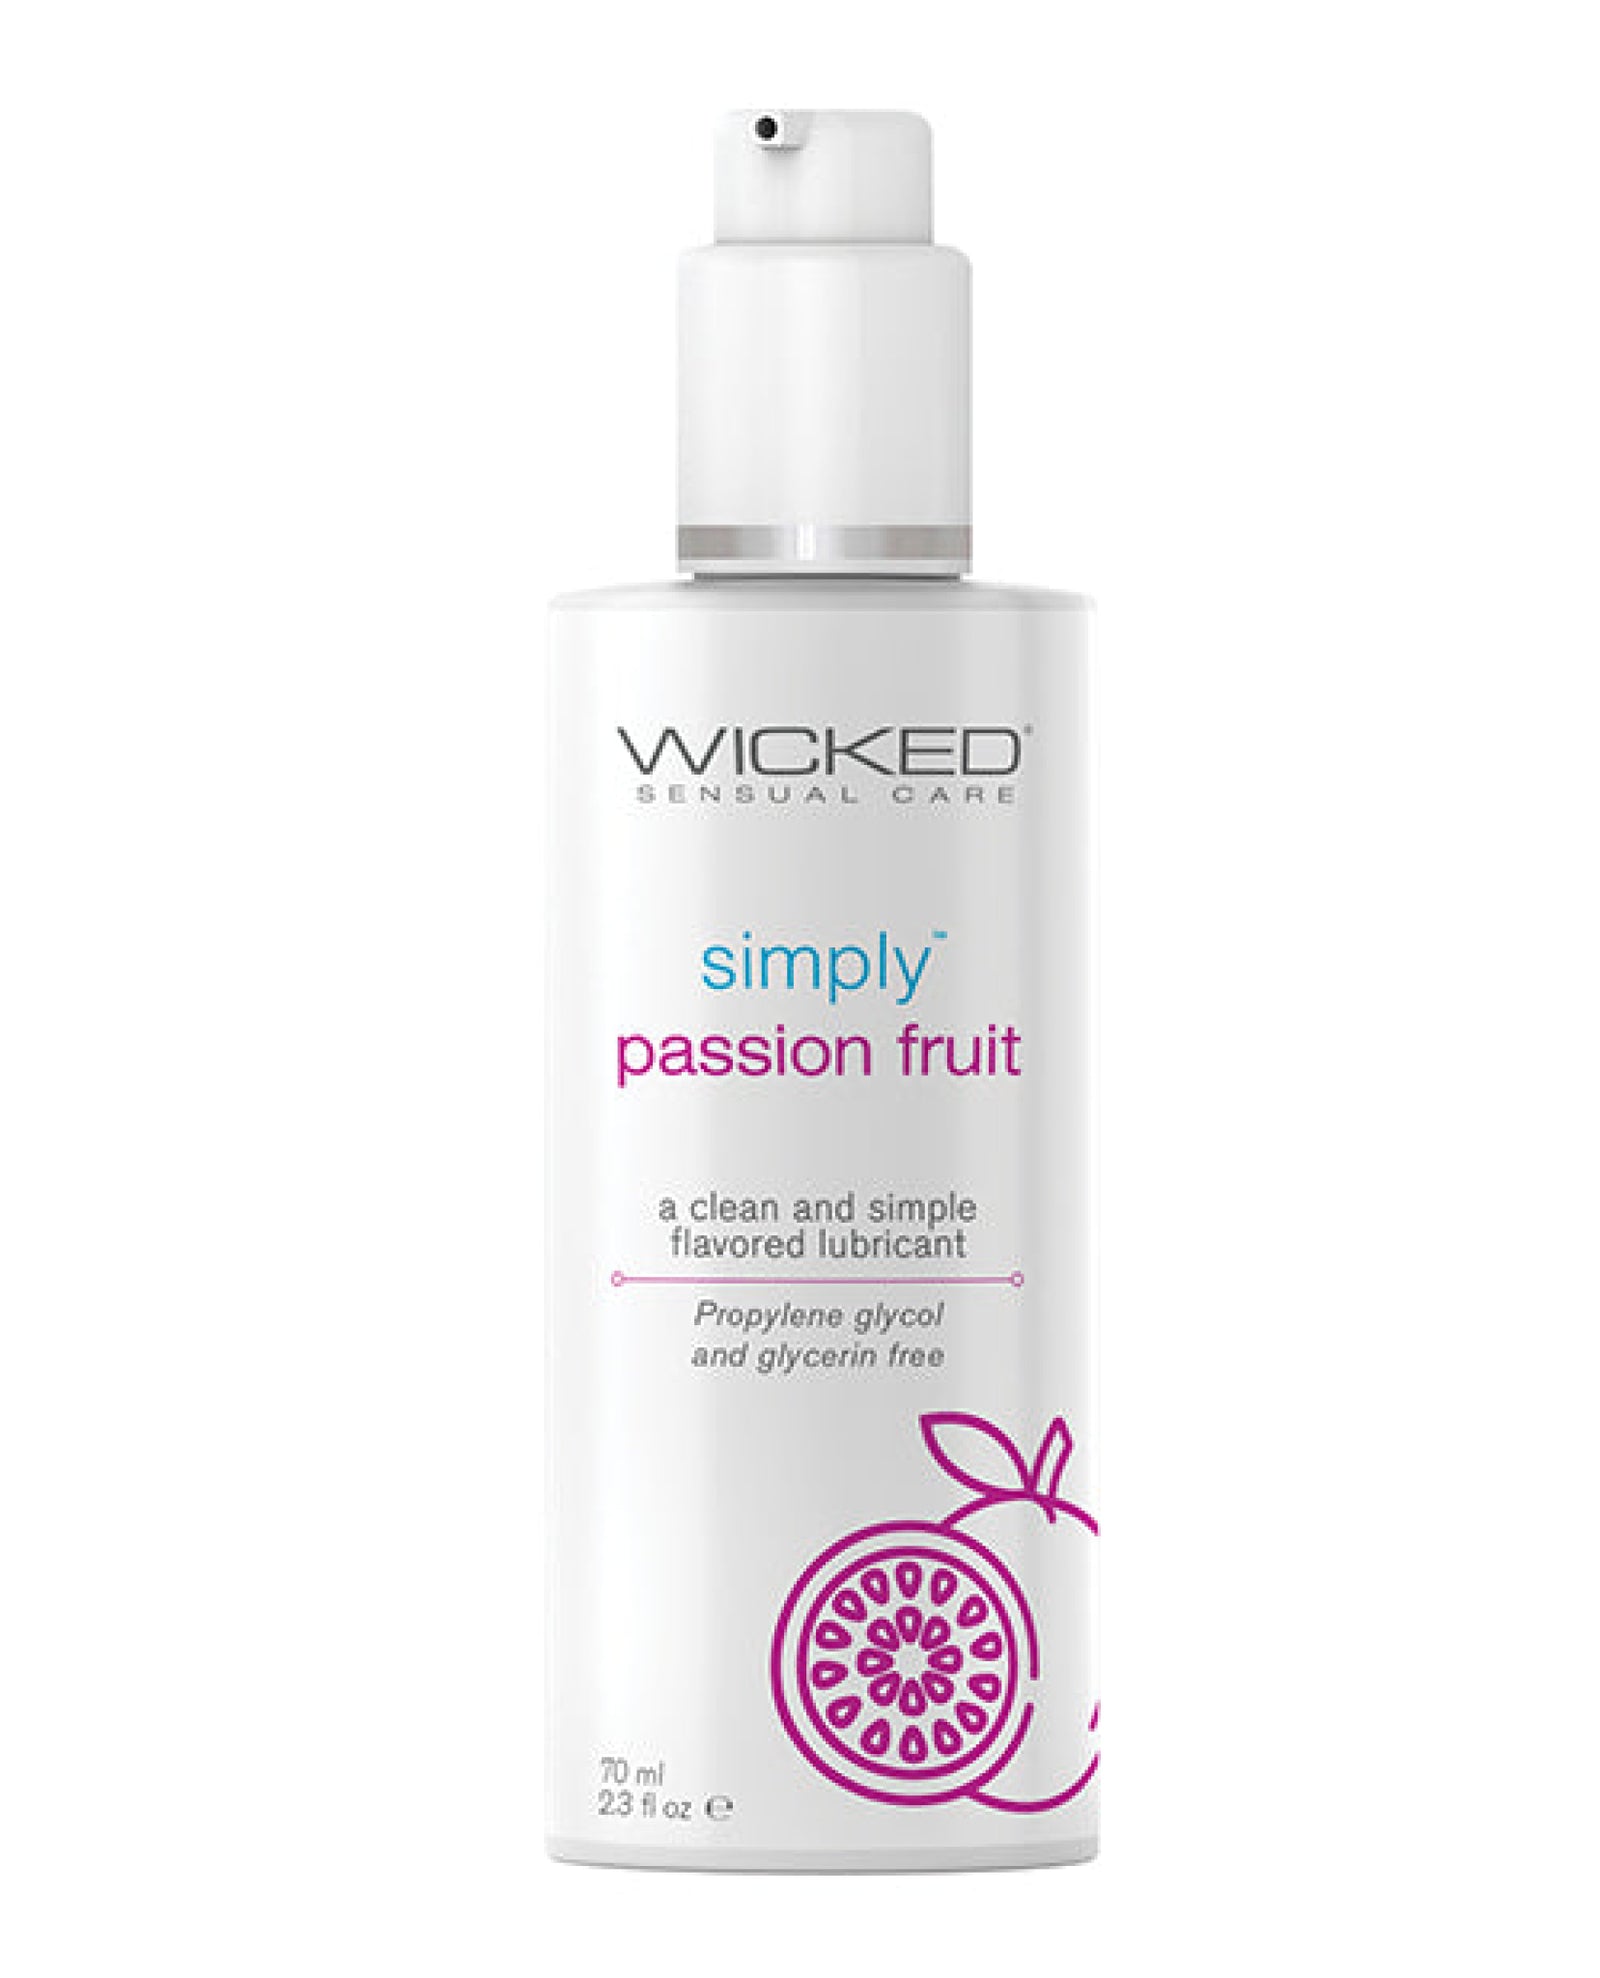 Wicked Sensual Care Simply Water Based Lubricant - 2.3 Oz Wicked Sensual Care